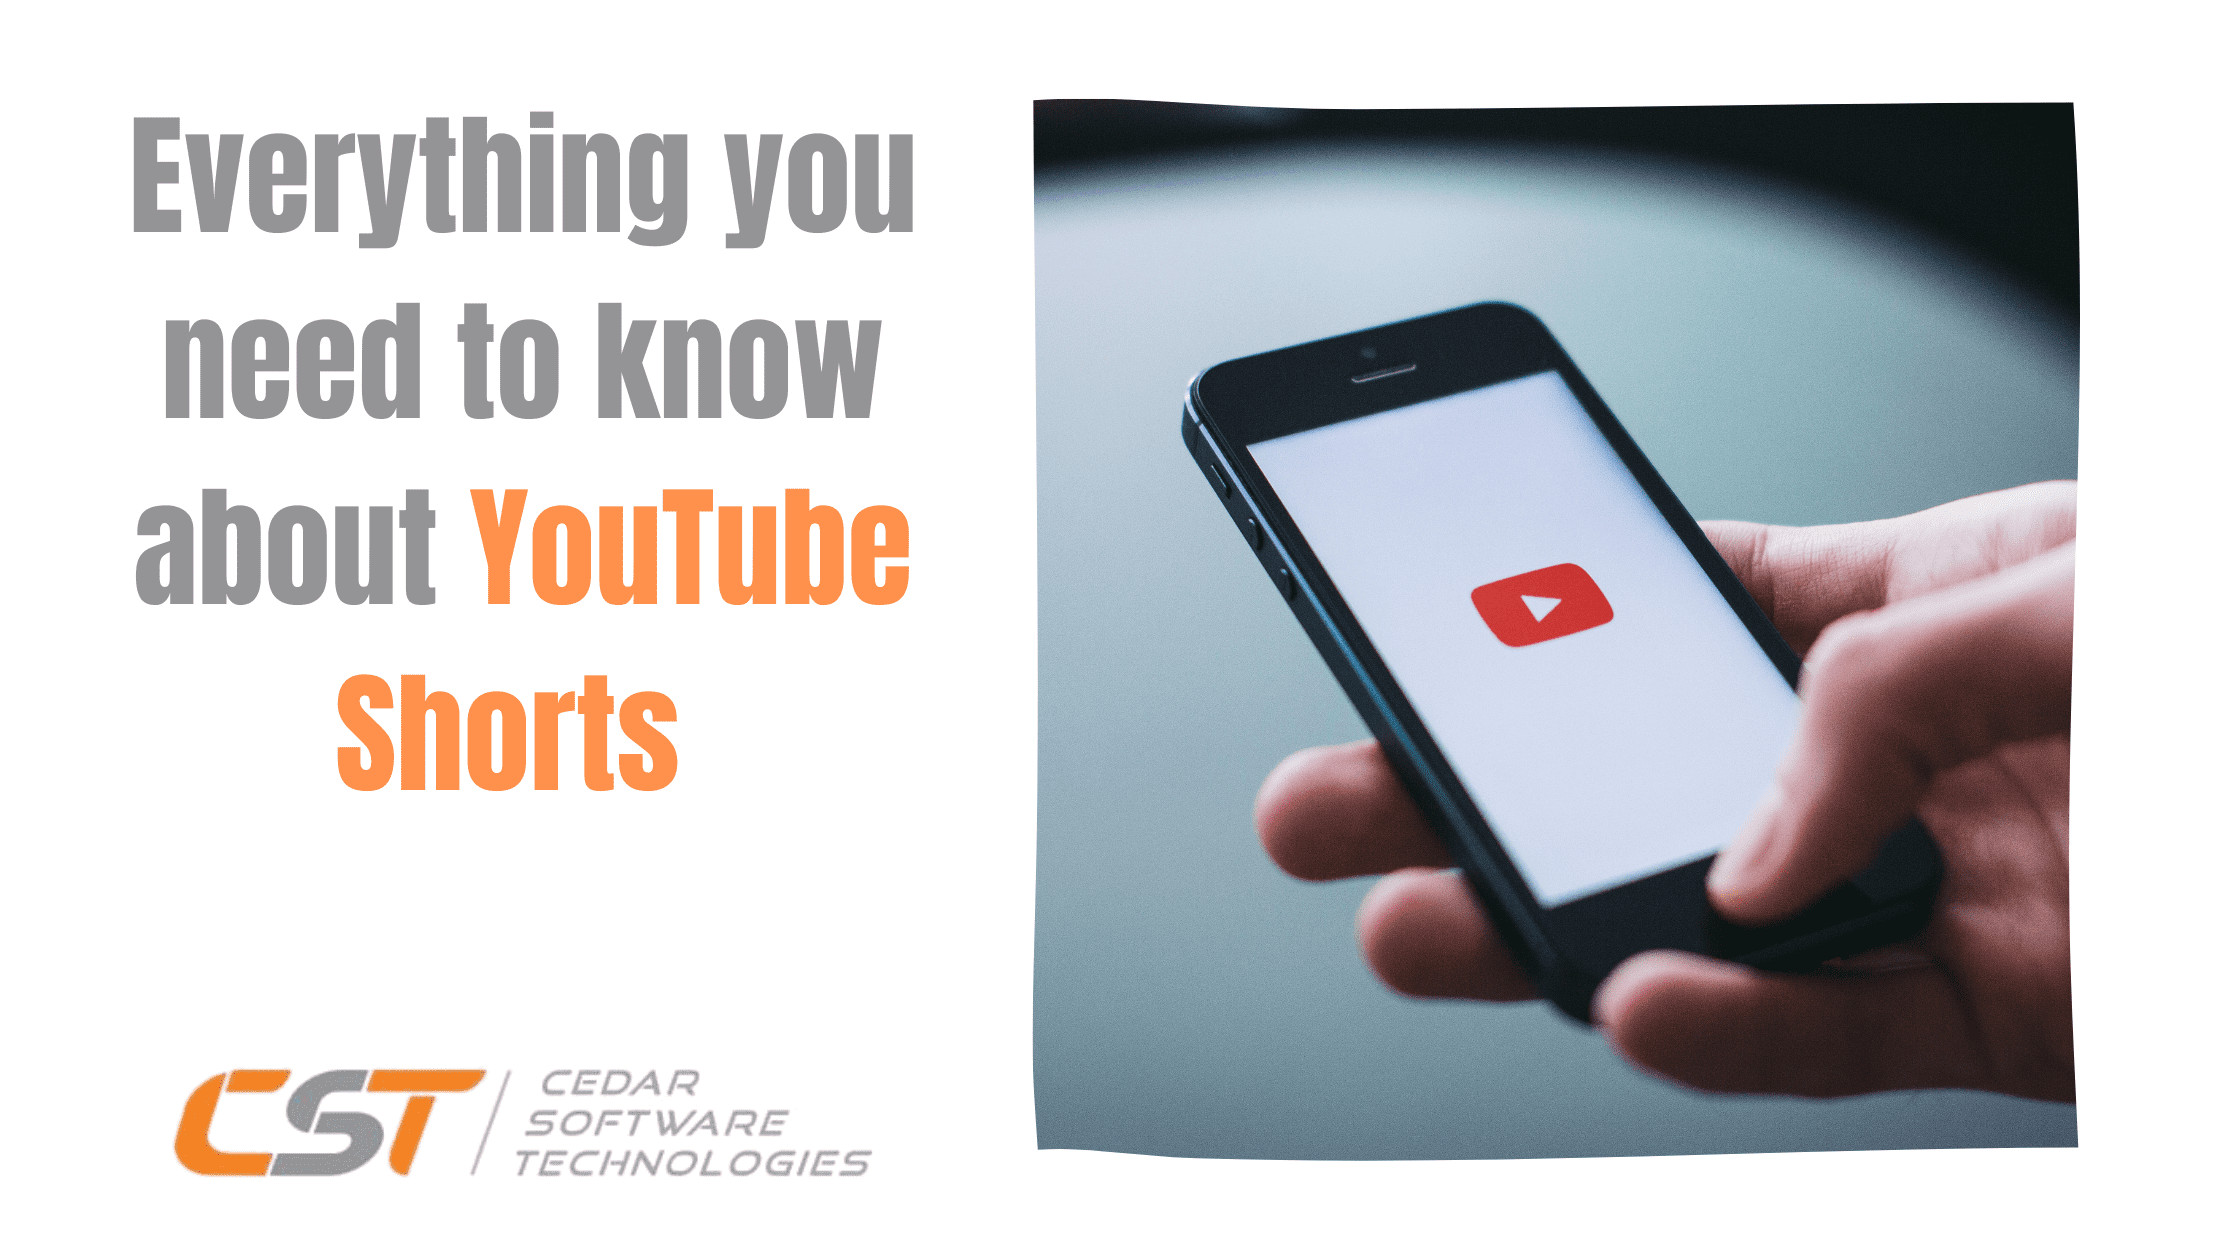 Everything you need to know about YouTube Shorts